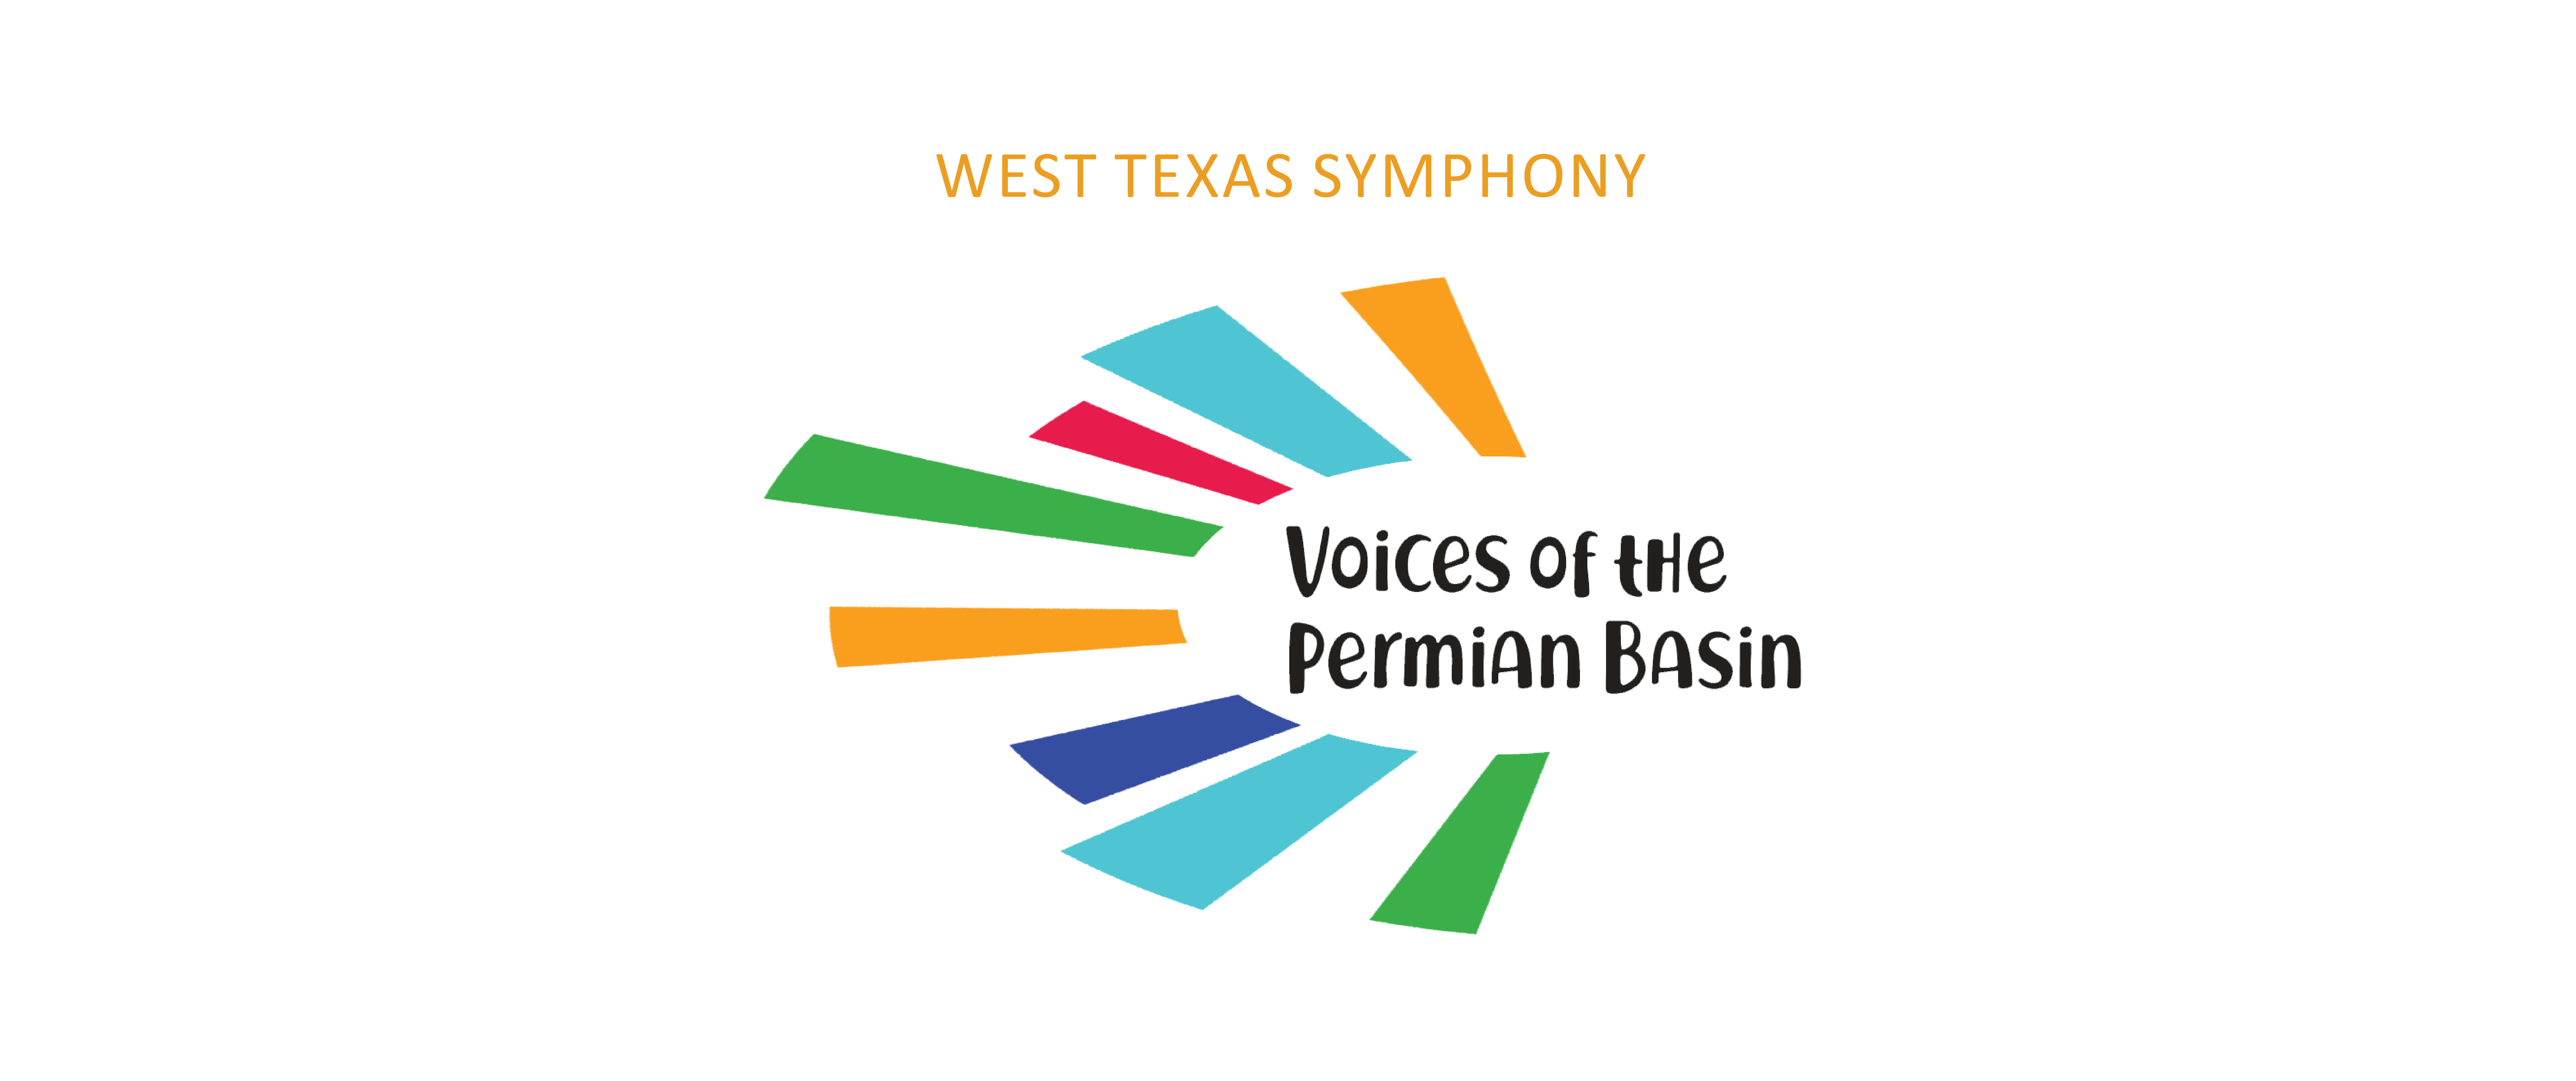 Voices of the Permian Basin - Spring Concert